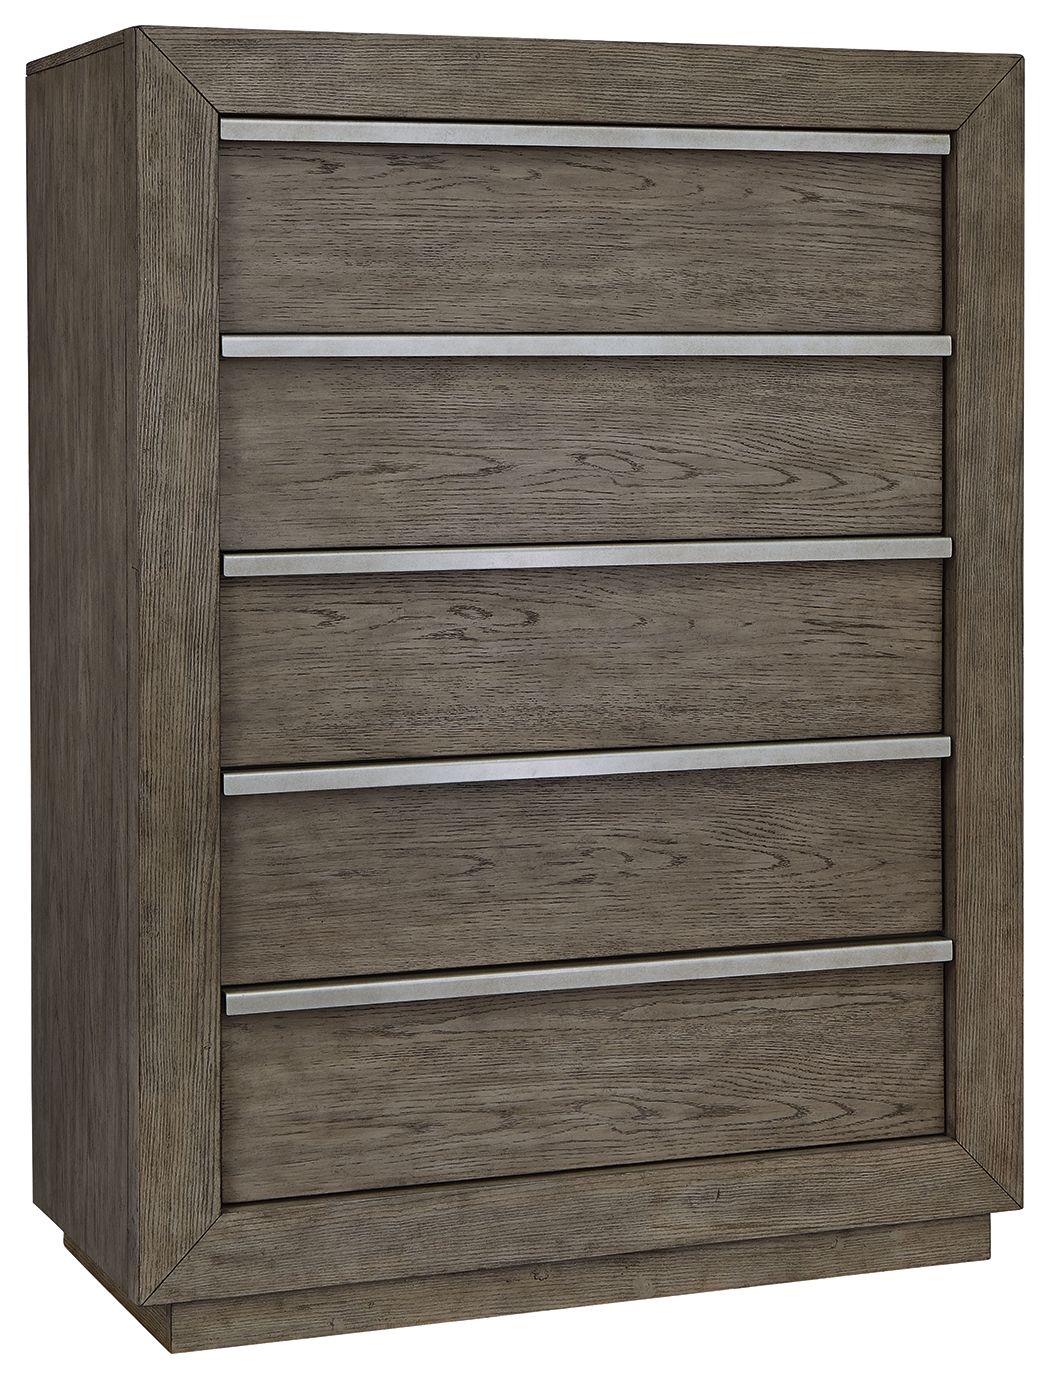 Anibecca - Weathered Gray - Five Drawer Chest Tony's Home Furnishings Furniture. Beds. Dressers. Sofas.